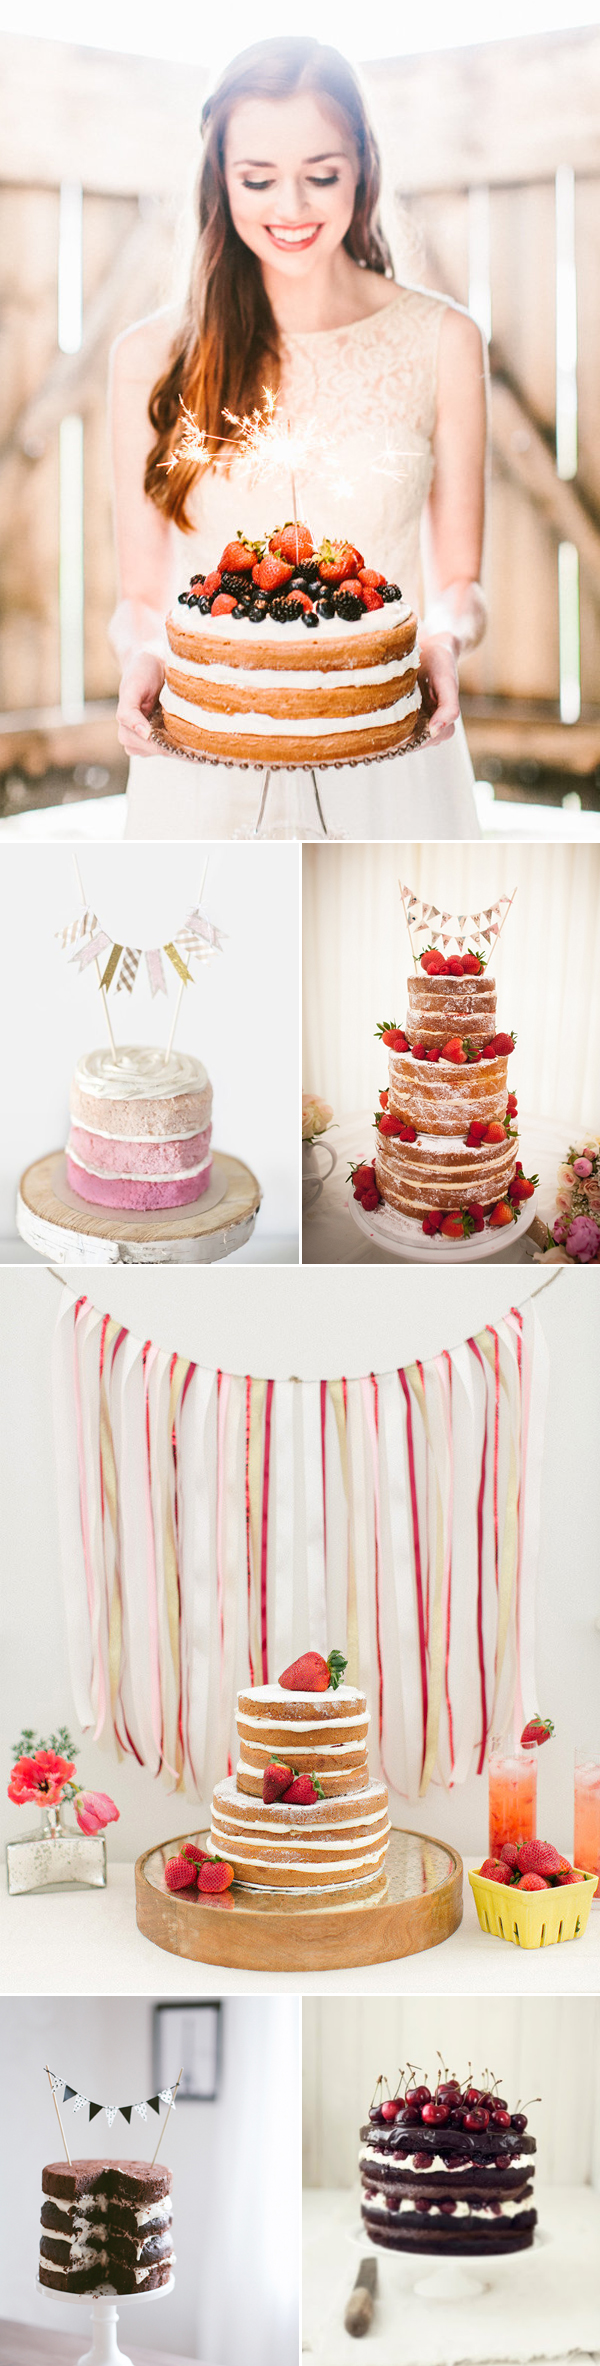 Rustic Naked Wedding Cake Ideas with Fruits or Toppers